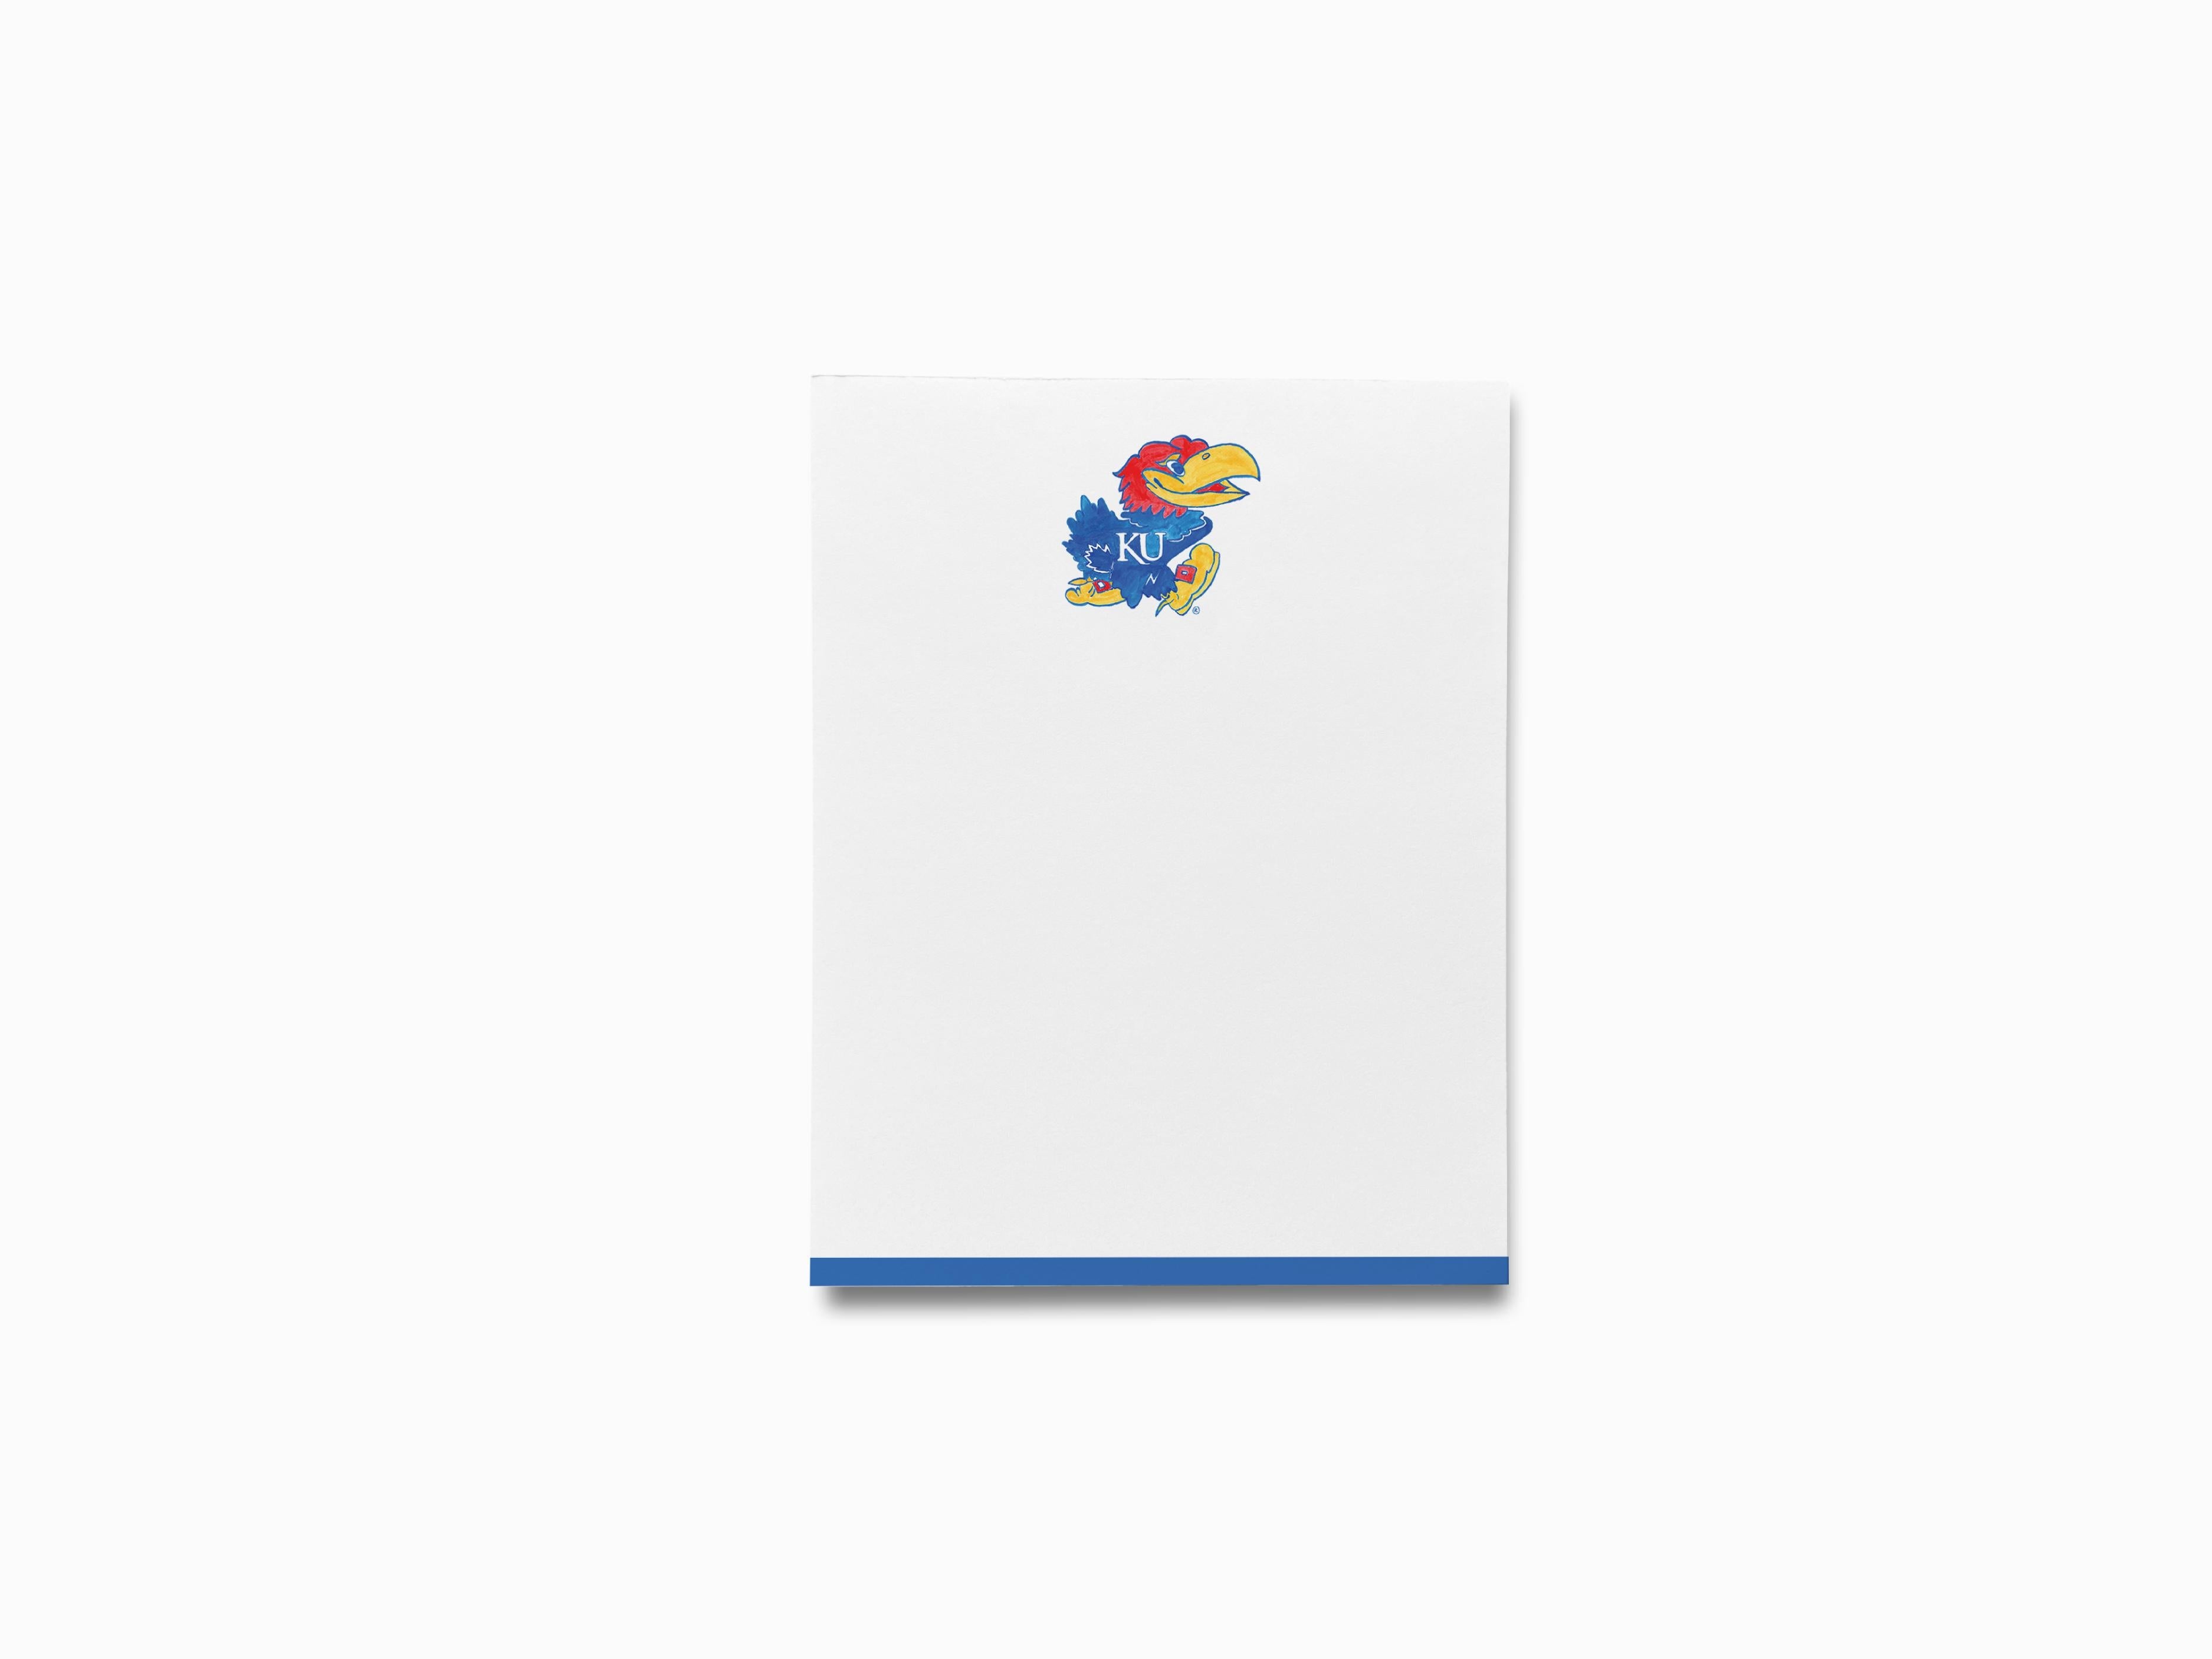 Kansas Jayhawk Notepad [Officially Licensed]-These notepads feature our hand-painted watercolor Jayhawk, printed in the USA on a beautiful smooth stock. You choose which size you want (or bundled together for a beautiful gift set) and makes a great gift for the checklist and University of Kansas lover in your life.-The Singing Little Bird